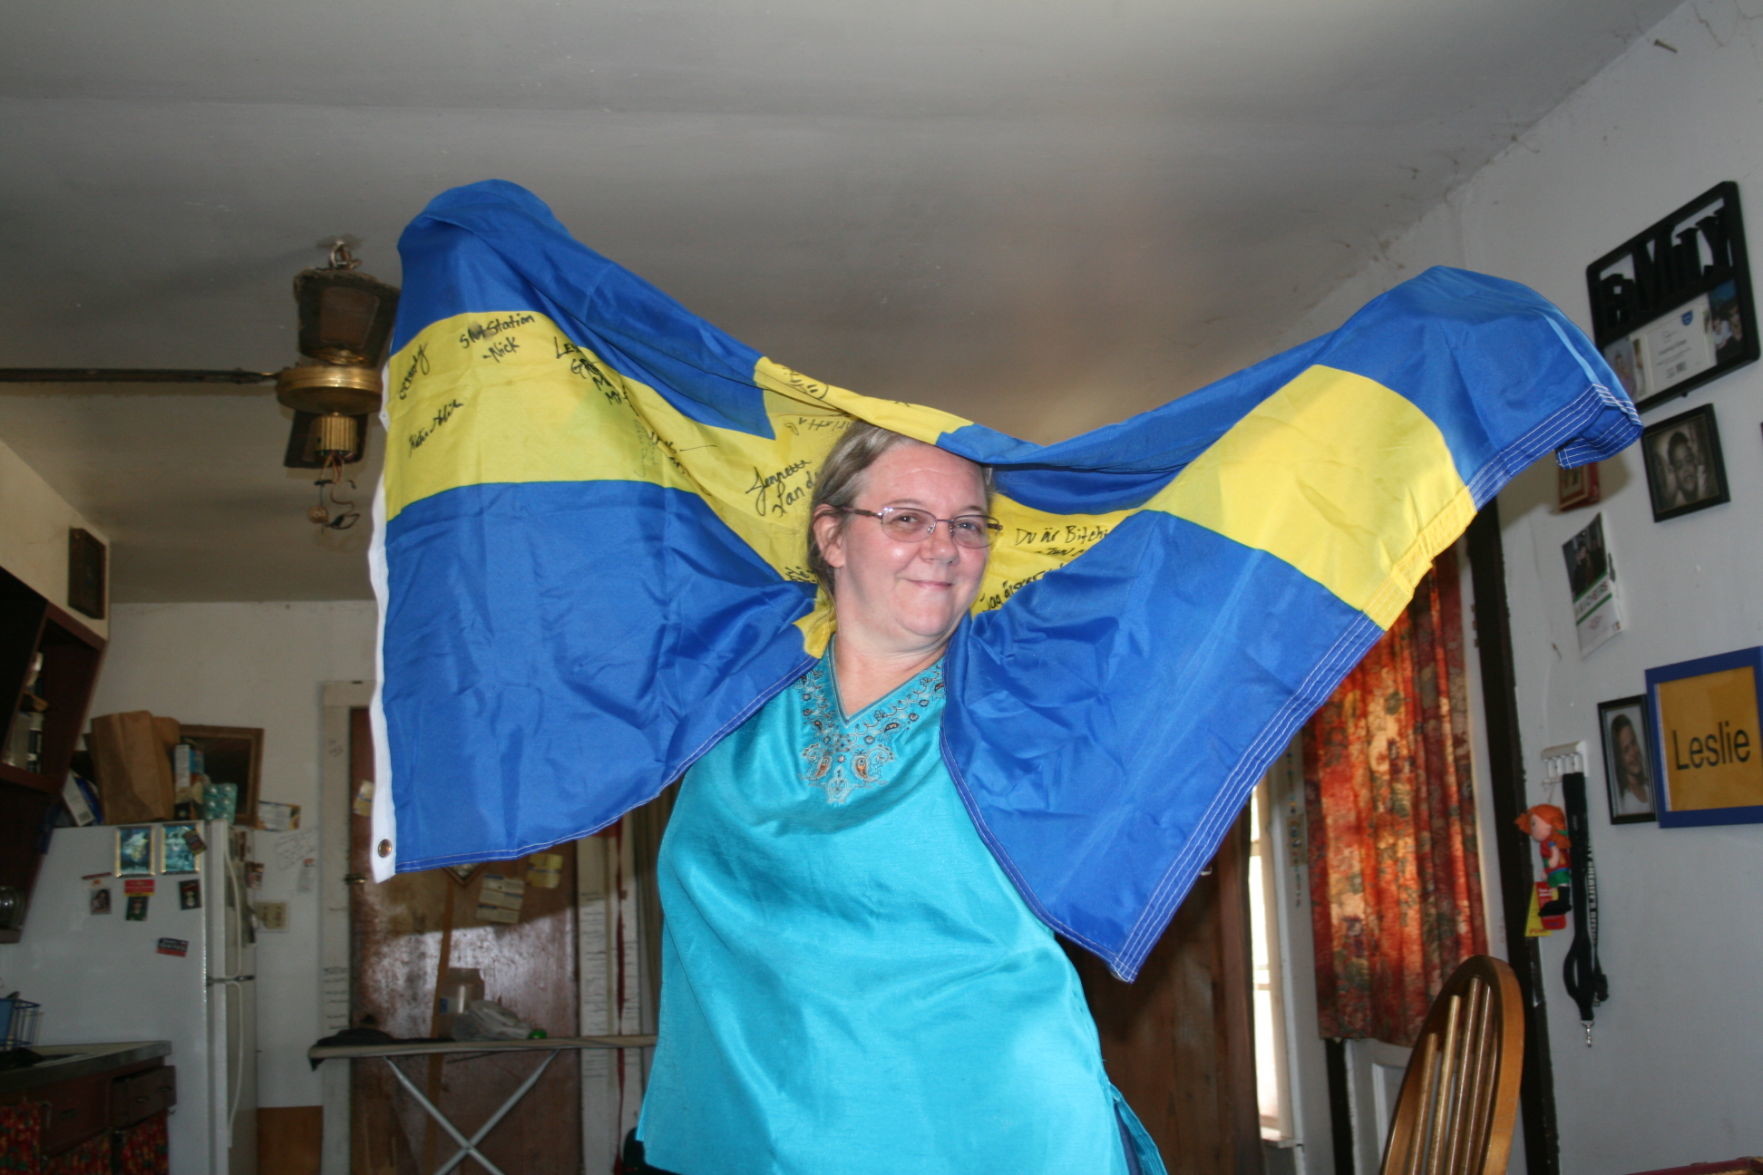 Adorned in a Swedish flag replete with signatures of friends and family from a distant land, Leslie Longoria basks in the banner of the home of her ancestors.